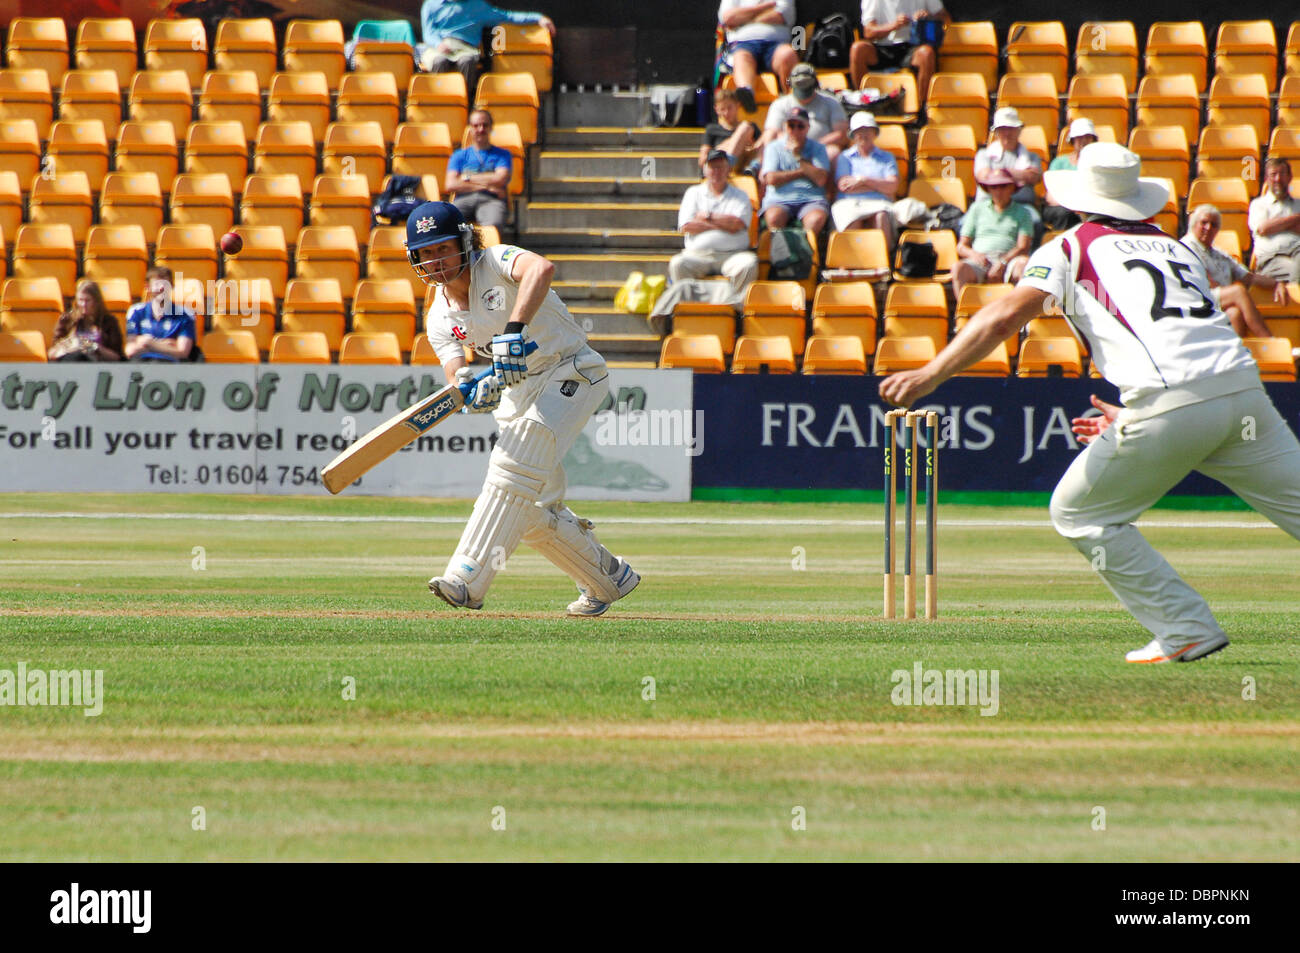 Northampton, UK. 2nd August, 2013. Northampton Cricket Club play Gloucester in the LVV Division 2 match held at the County Ground in Northampton. Gloucestershire won the toss and elected to bat. Credit:  Bigred/Alamy Live News Stock Photo